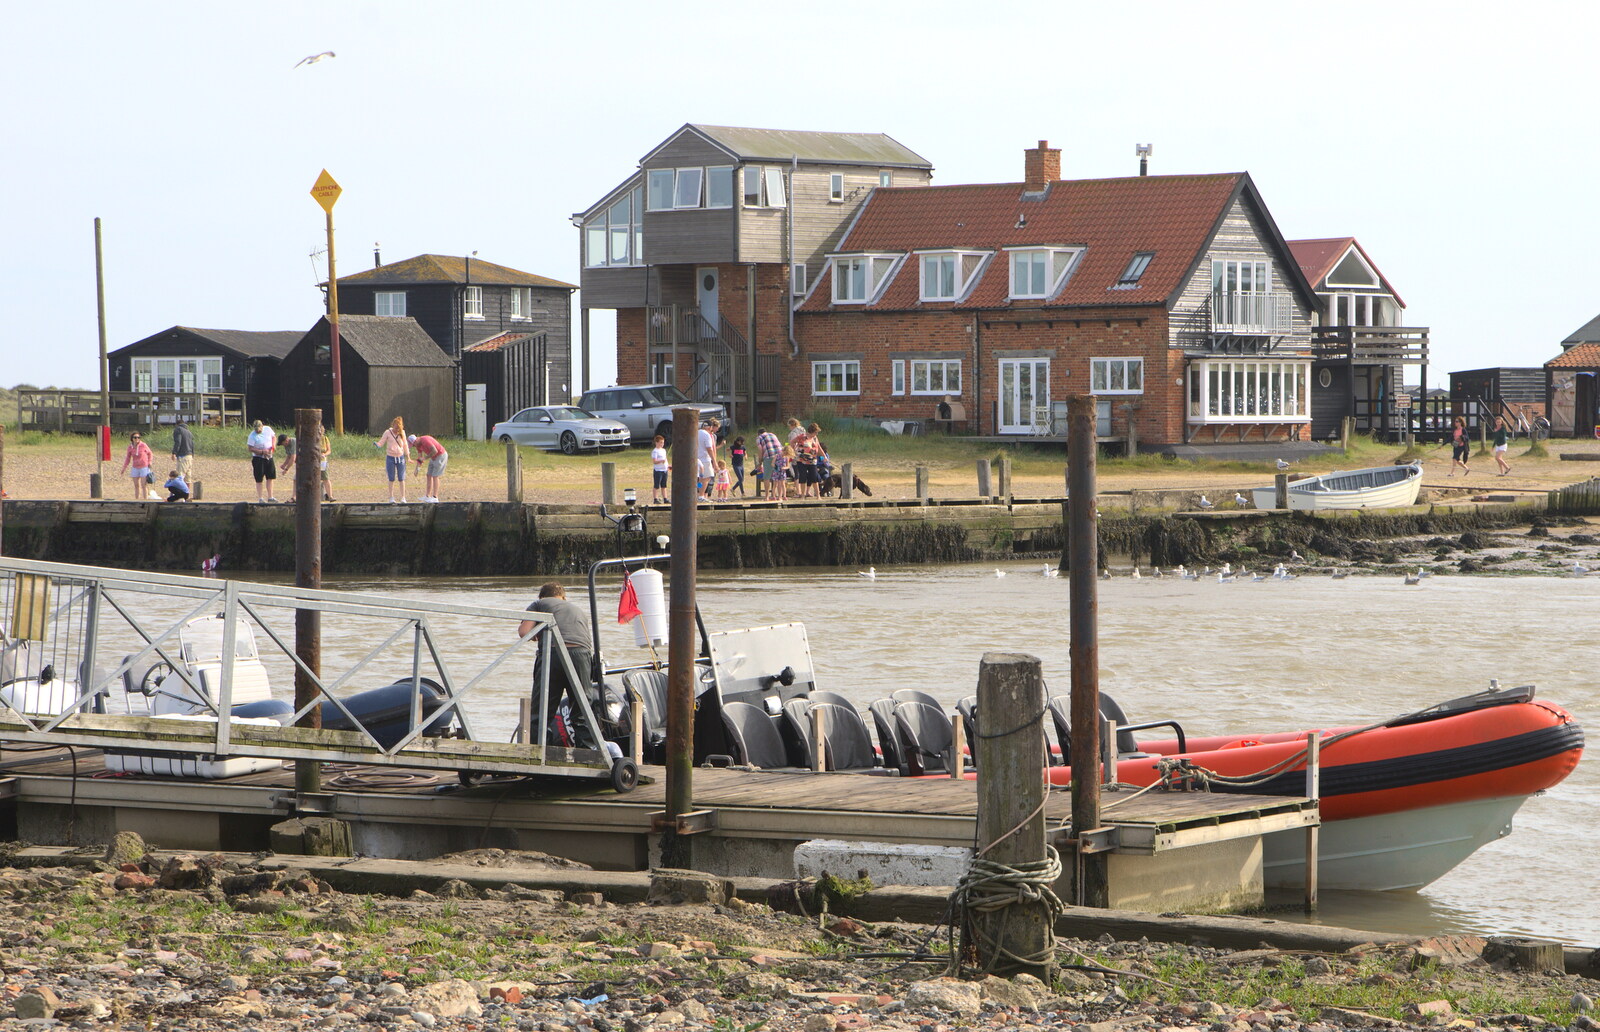 Over the river to Walberswick from The Danger of Trees: A Camping (Mis)adventure - Southwold, Suffolk - 3rd August 2015